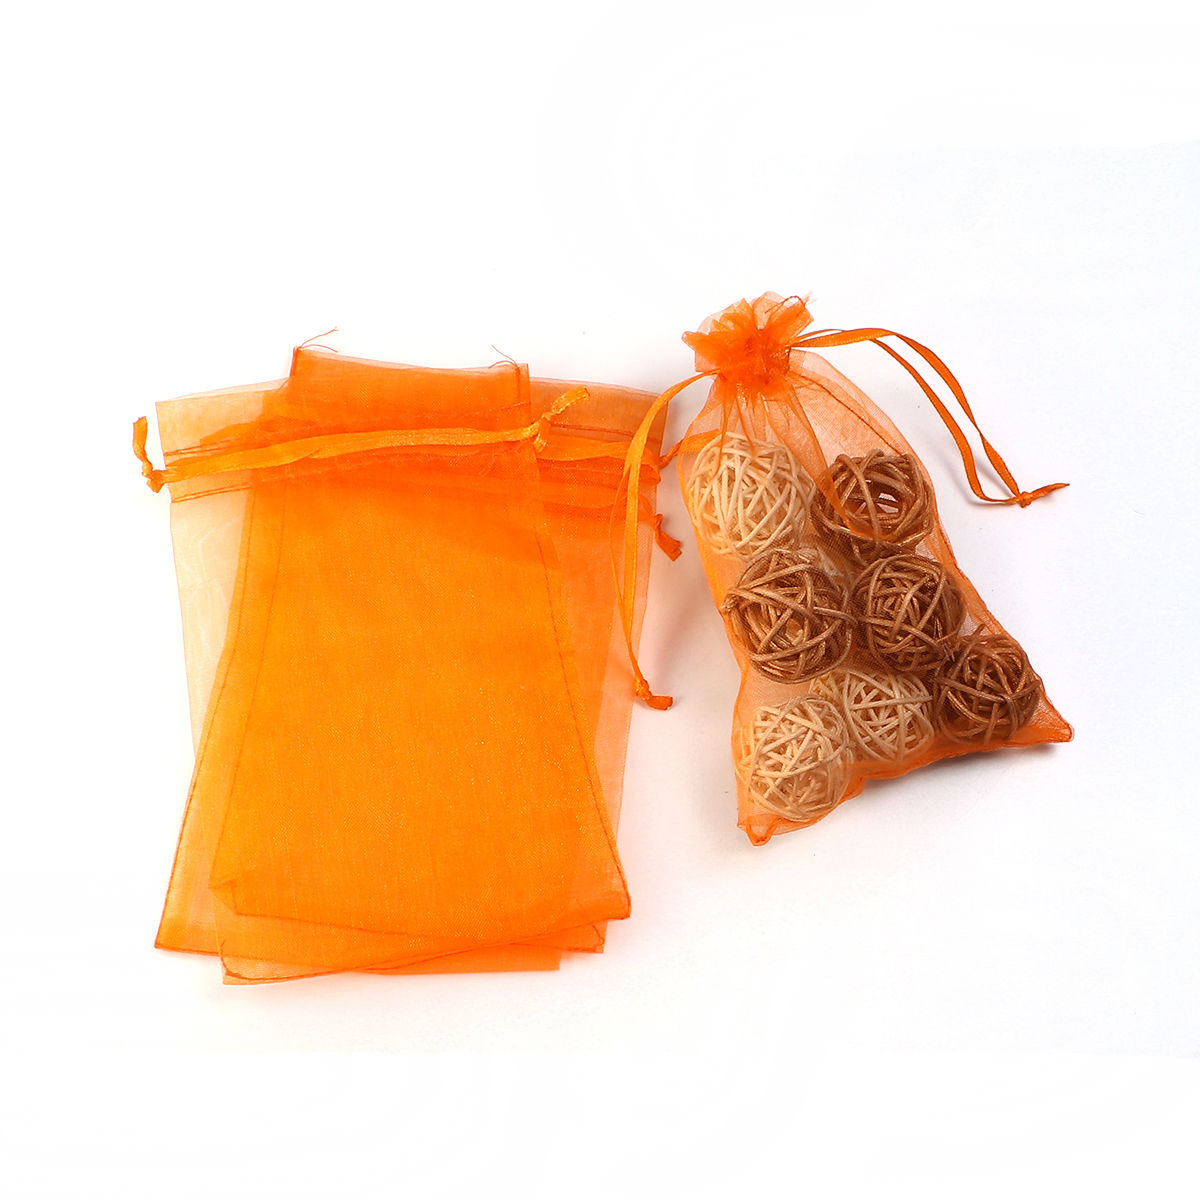 Picture of Wedding Gift Organza Jewelry Bags Drawstring Rectangle Orange (Usable Space: 13x10cm) 15cm(5 7/8") x 10cm(3 7/8"), 20 PCs